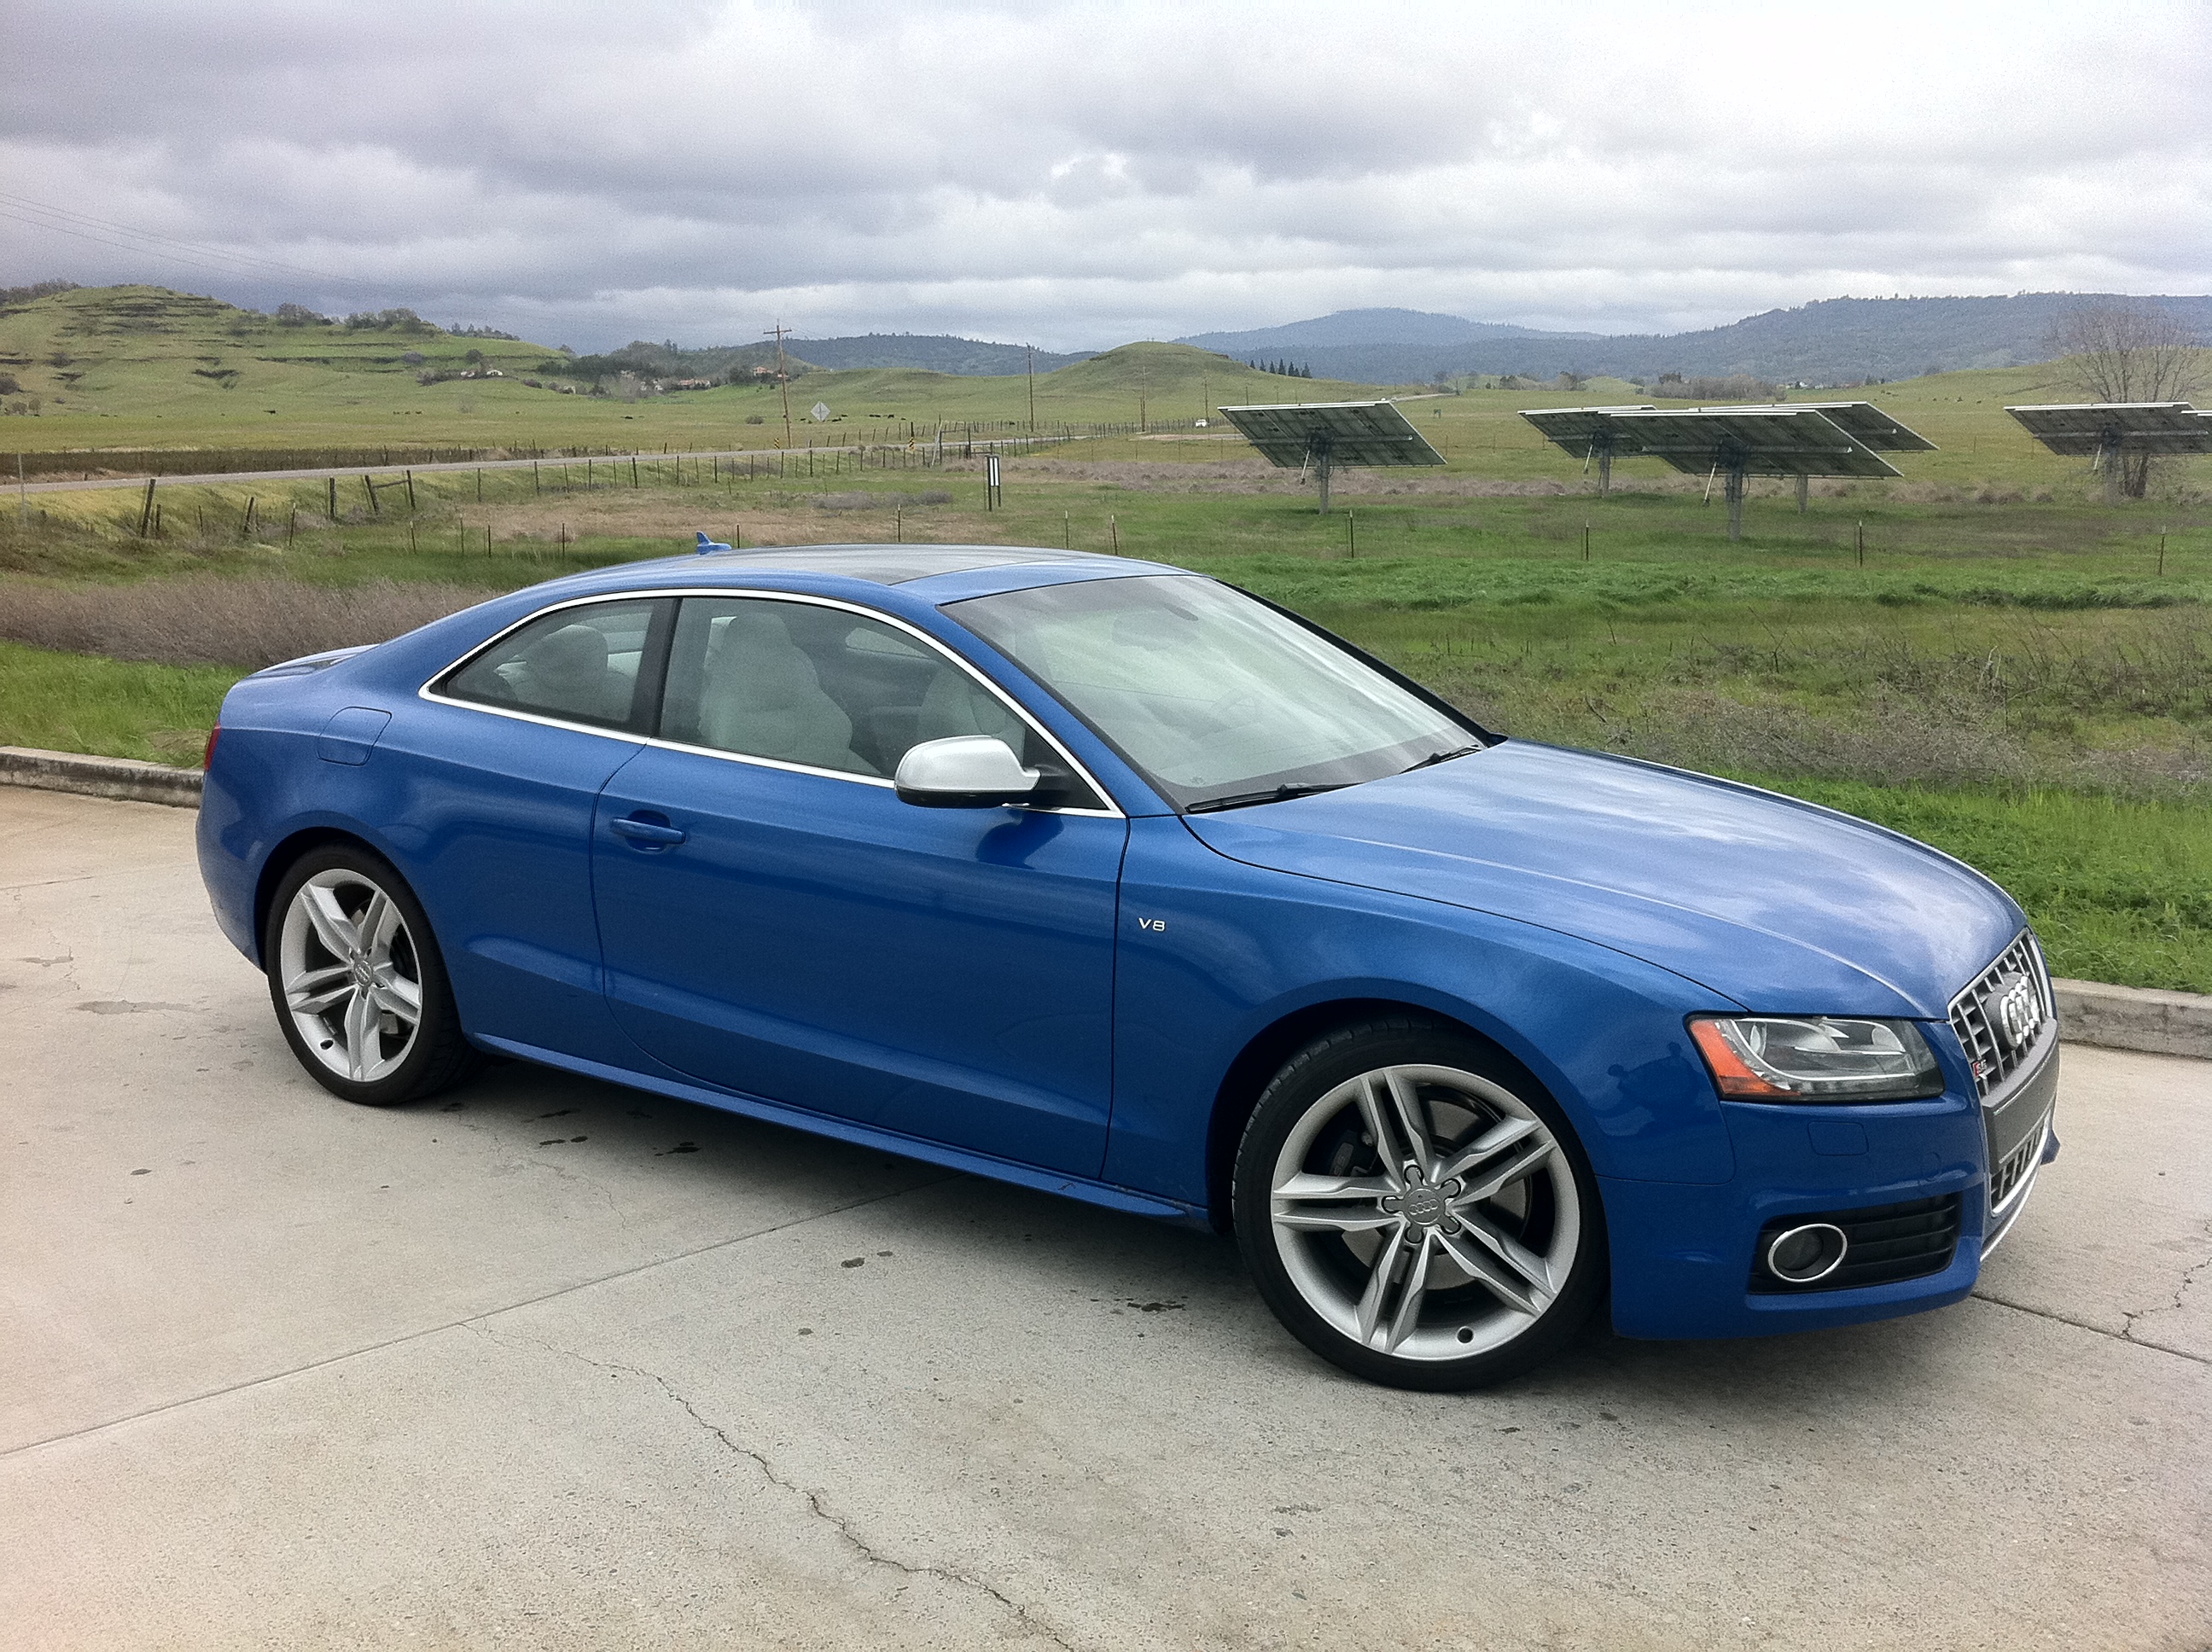 2011 Audi S5 Review - A Modern Grand Tourer With Emotion